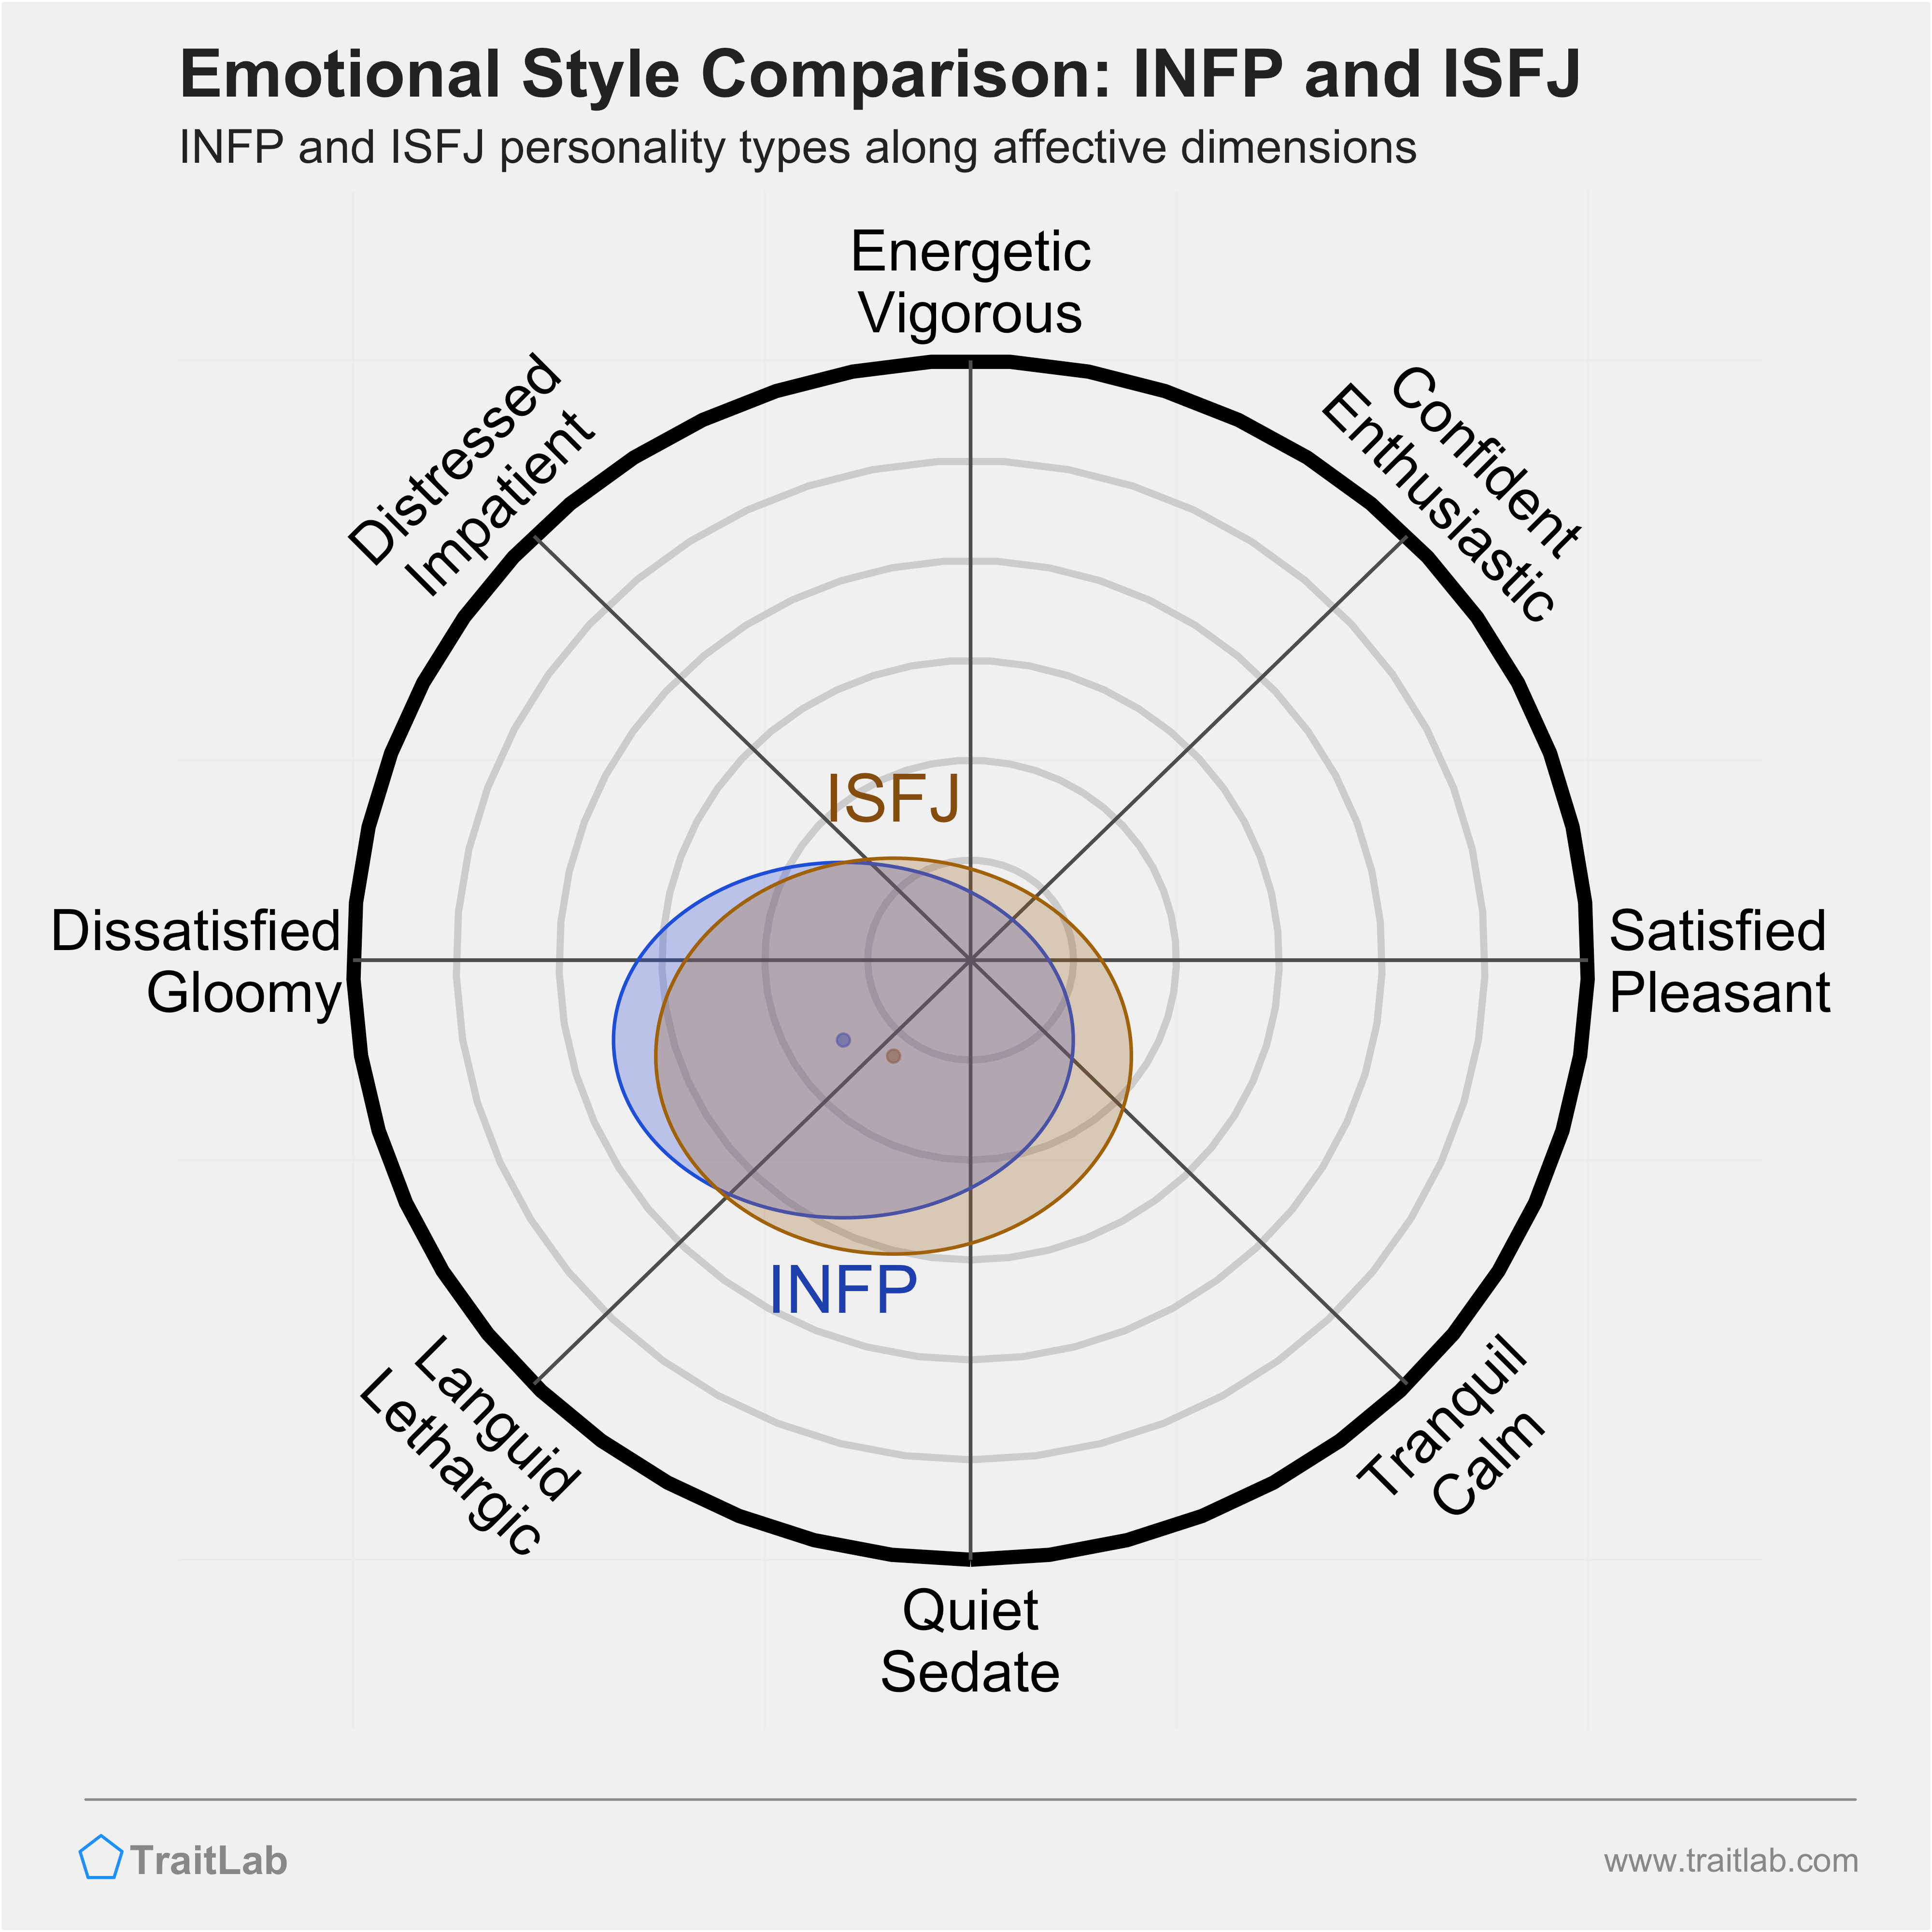 INFP and ISFJ comparison across emotional (affective) dimensions